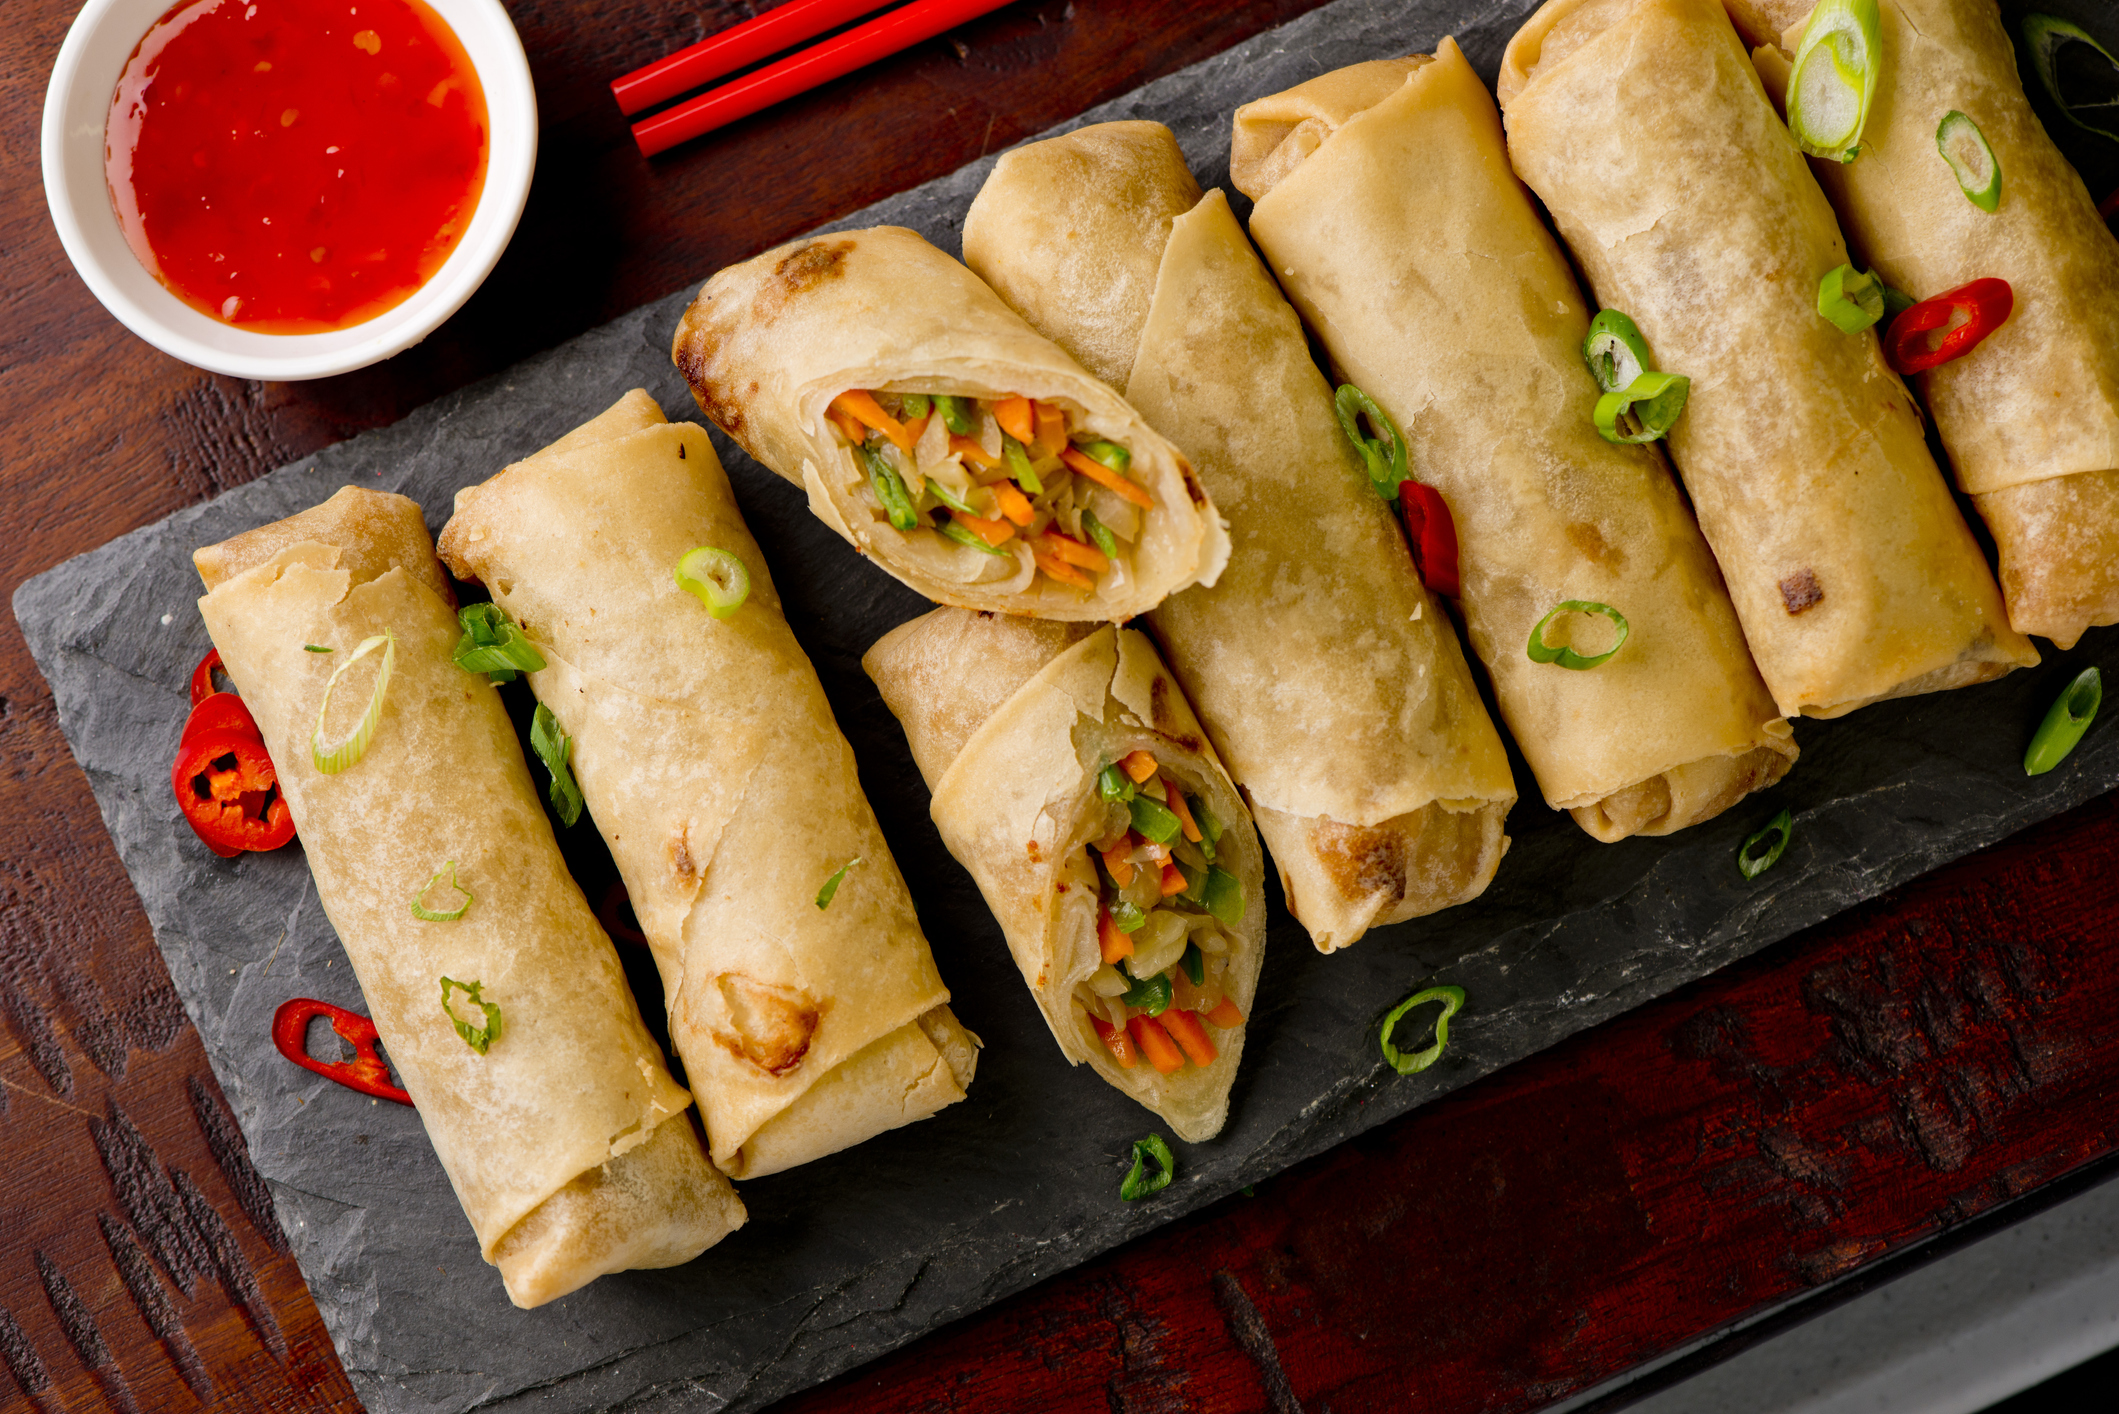 Indulge in Delicious Flavors at the Tasty Eggroll Restaurant in Plano